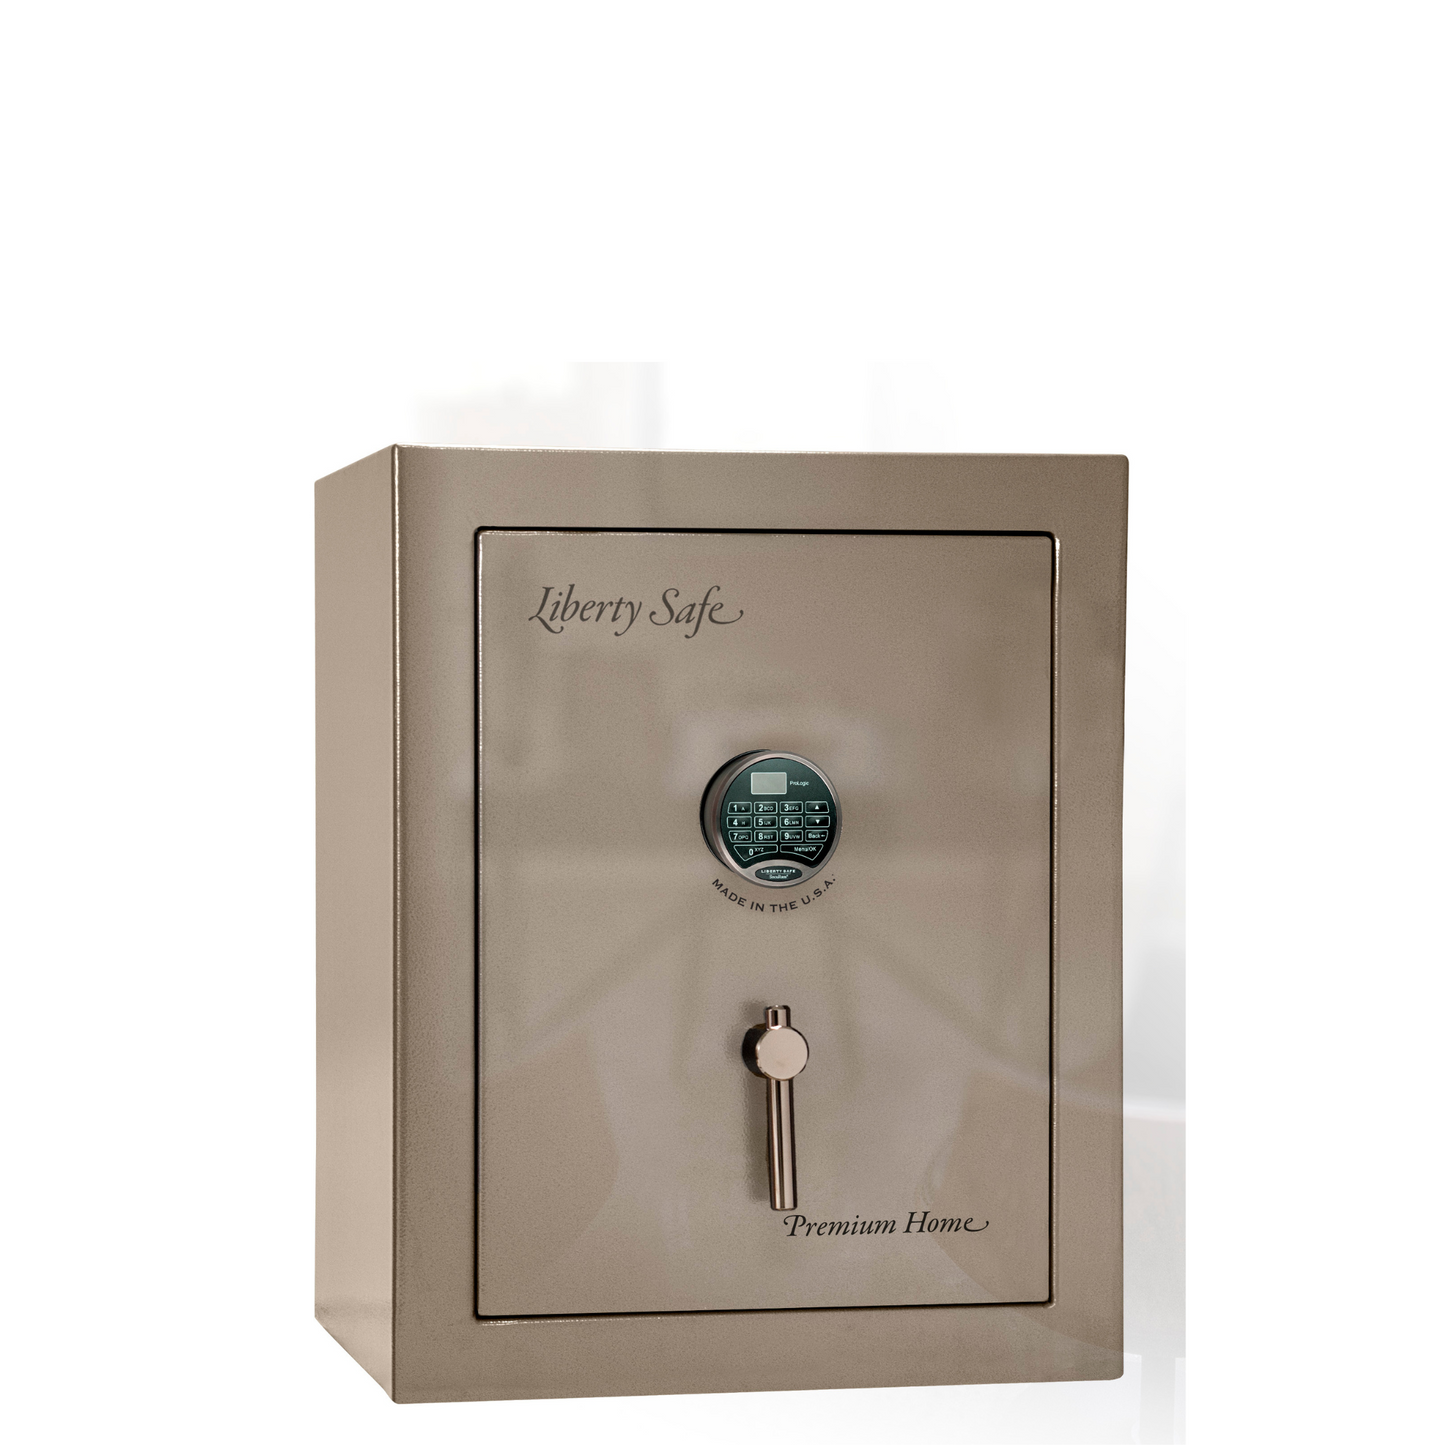 Premium Home Series | Level 7 Security | 2 Hour Fire Protection | 08 | Dimensions: 29.75"(H) x 24.5"(W) x 19"(D) | Champagne Gloss - Closed Door